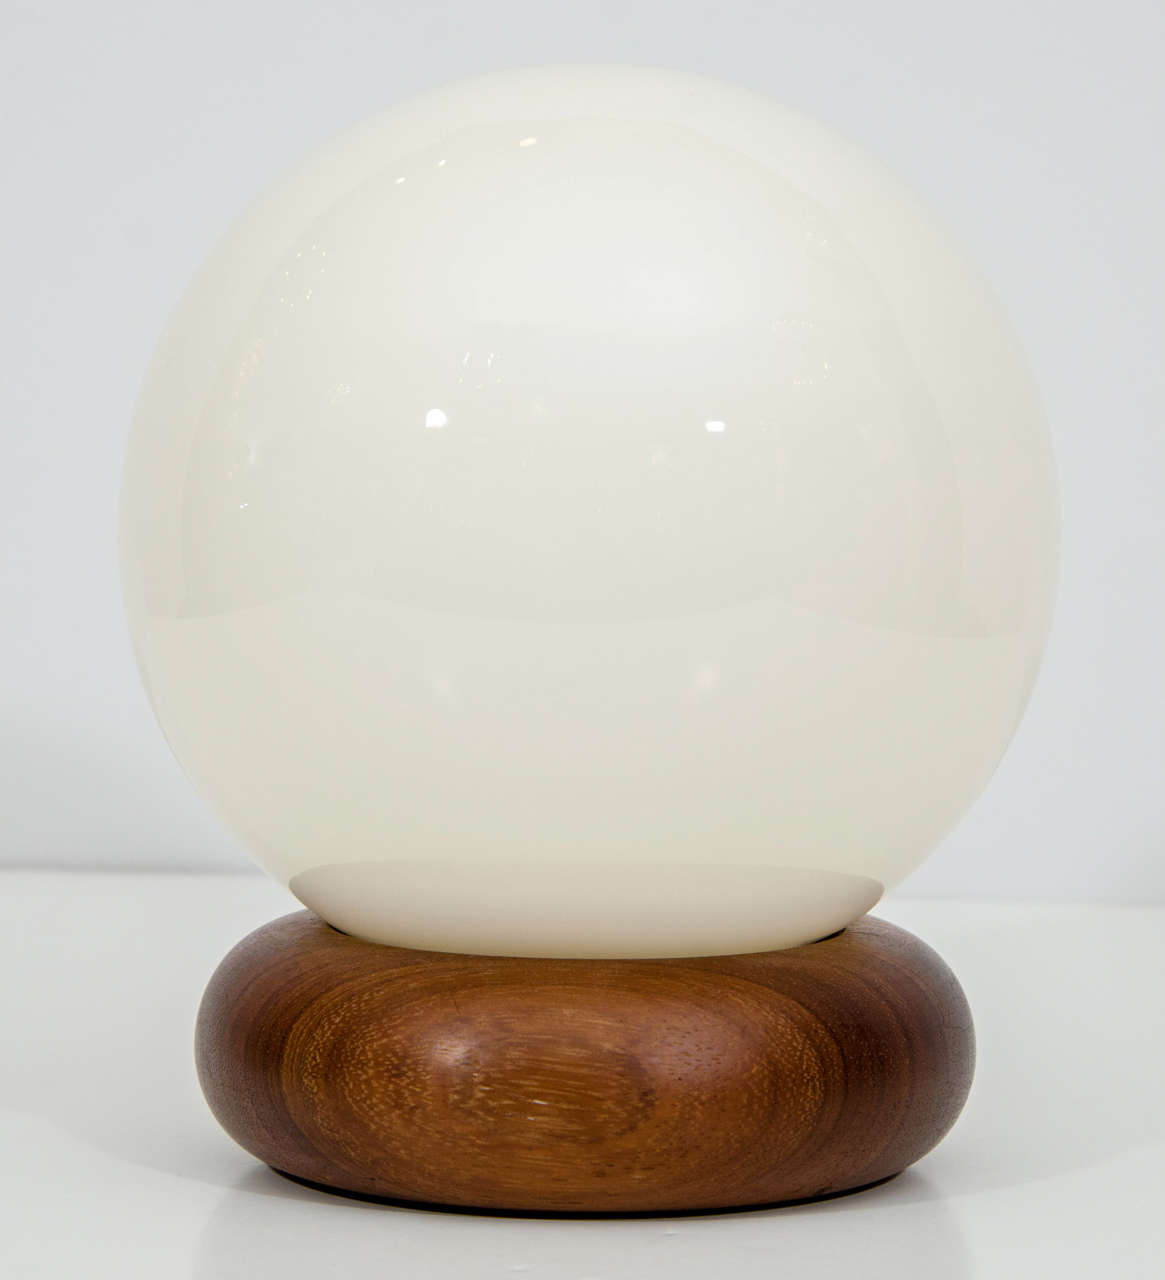 Charming pair of mod, Swedish accent lamps. Glass globes rest in contoured walnut bases. Please contact for location.